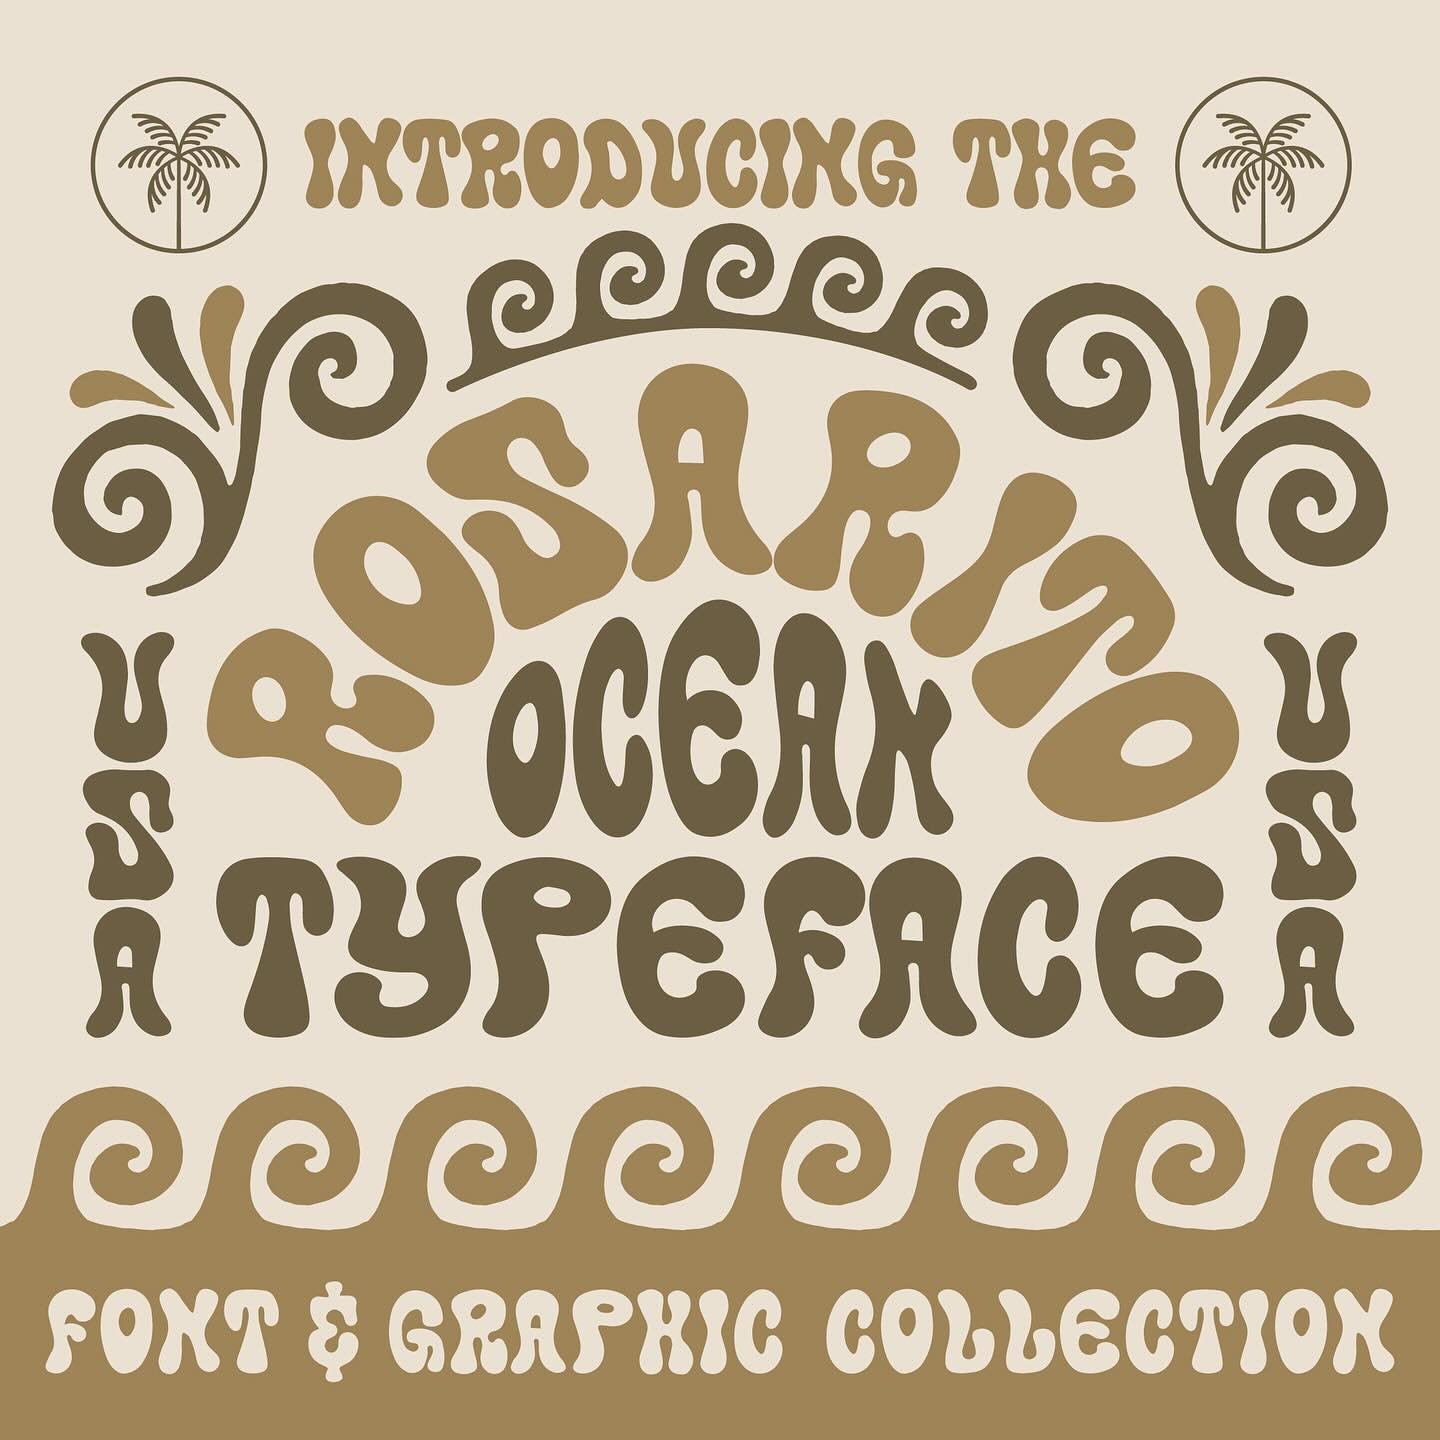 The Rosarito typeface is here! A fully hand drawn typeface inspired by a blend of the beaches of Baja Mexico as well as psychedelic poster design. This font also includes a design collection that comes with:

&bull; 2 poster designs
&bull; 2 bandana 